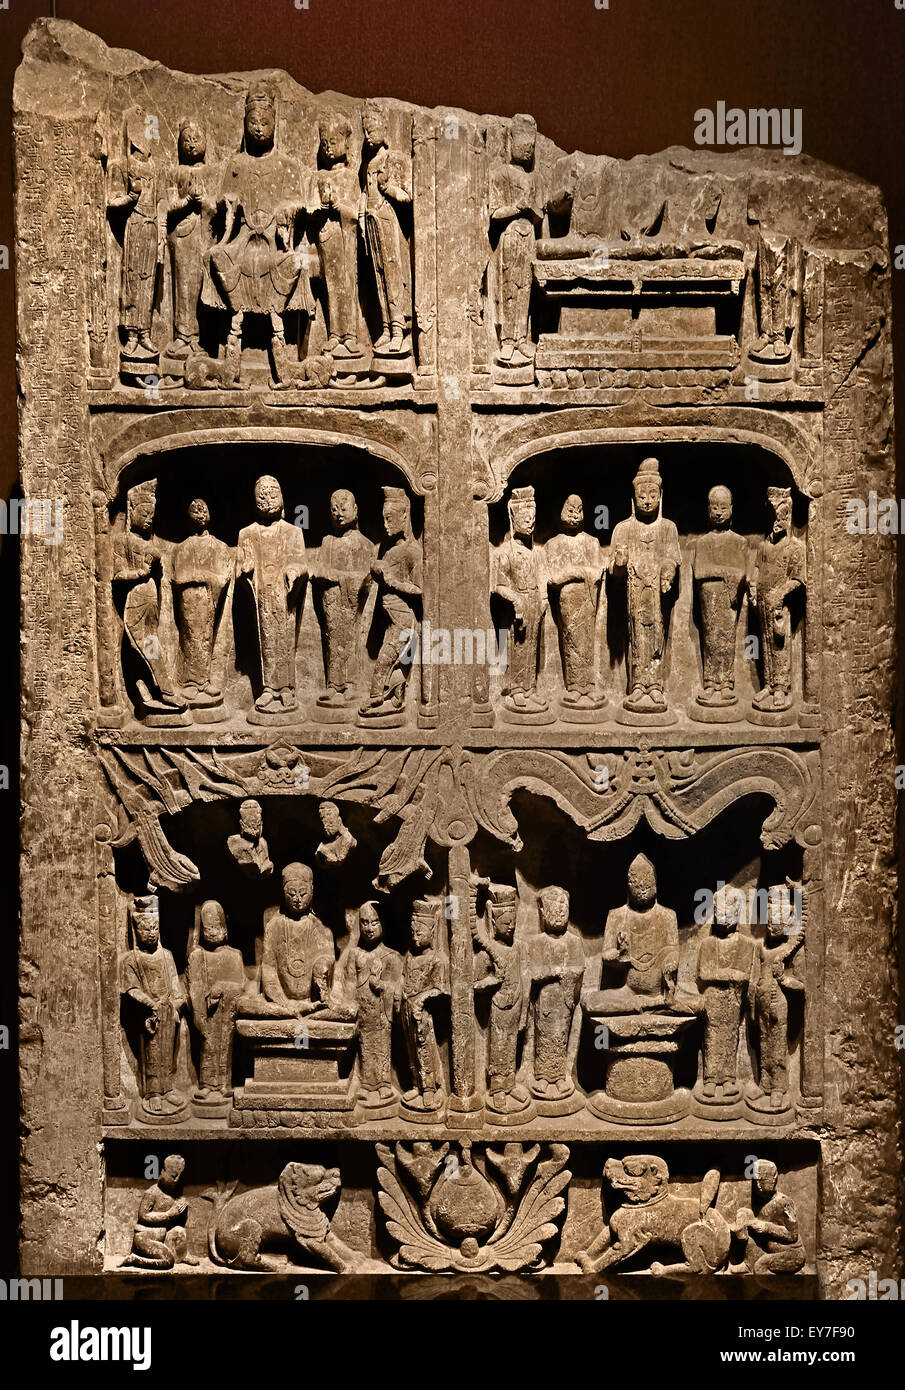 Buddhist Stele stone Northern Qi ad 550 to 577  Shanghai Museum of ancient Chinese art China ( Northern Q was one of the Northern dynasties of Chinese history and ruled northern China from 550 to 577 ) Stock Photo